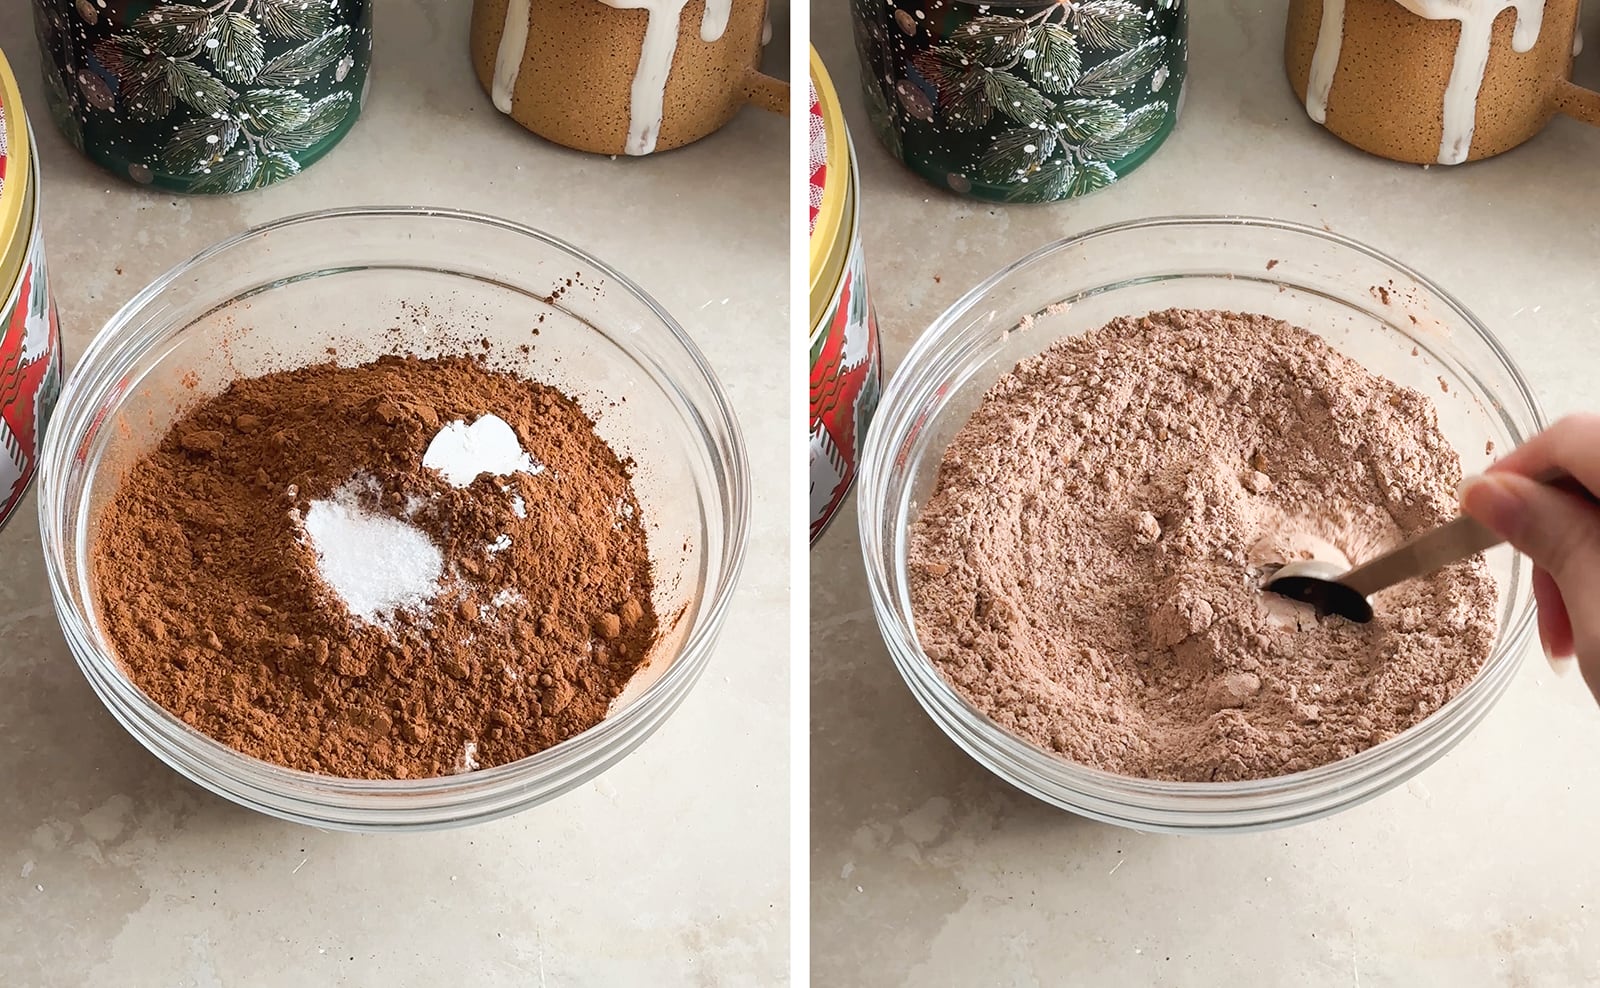 Left to right: dry ingredients in a bowl, stirring flour mixture together with a spoon.